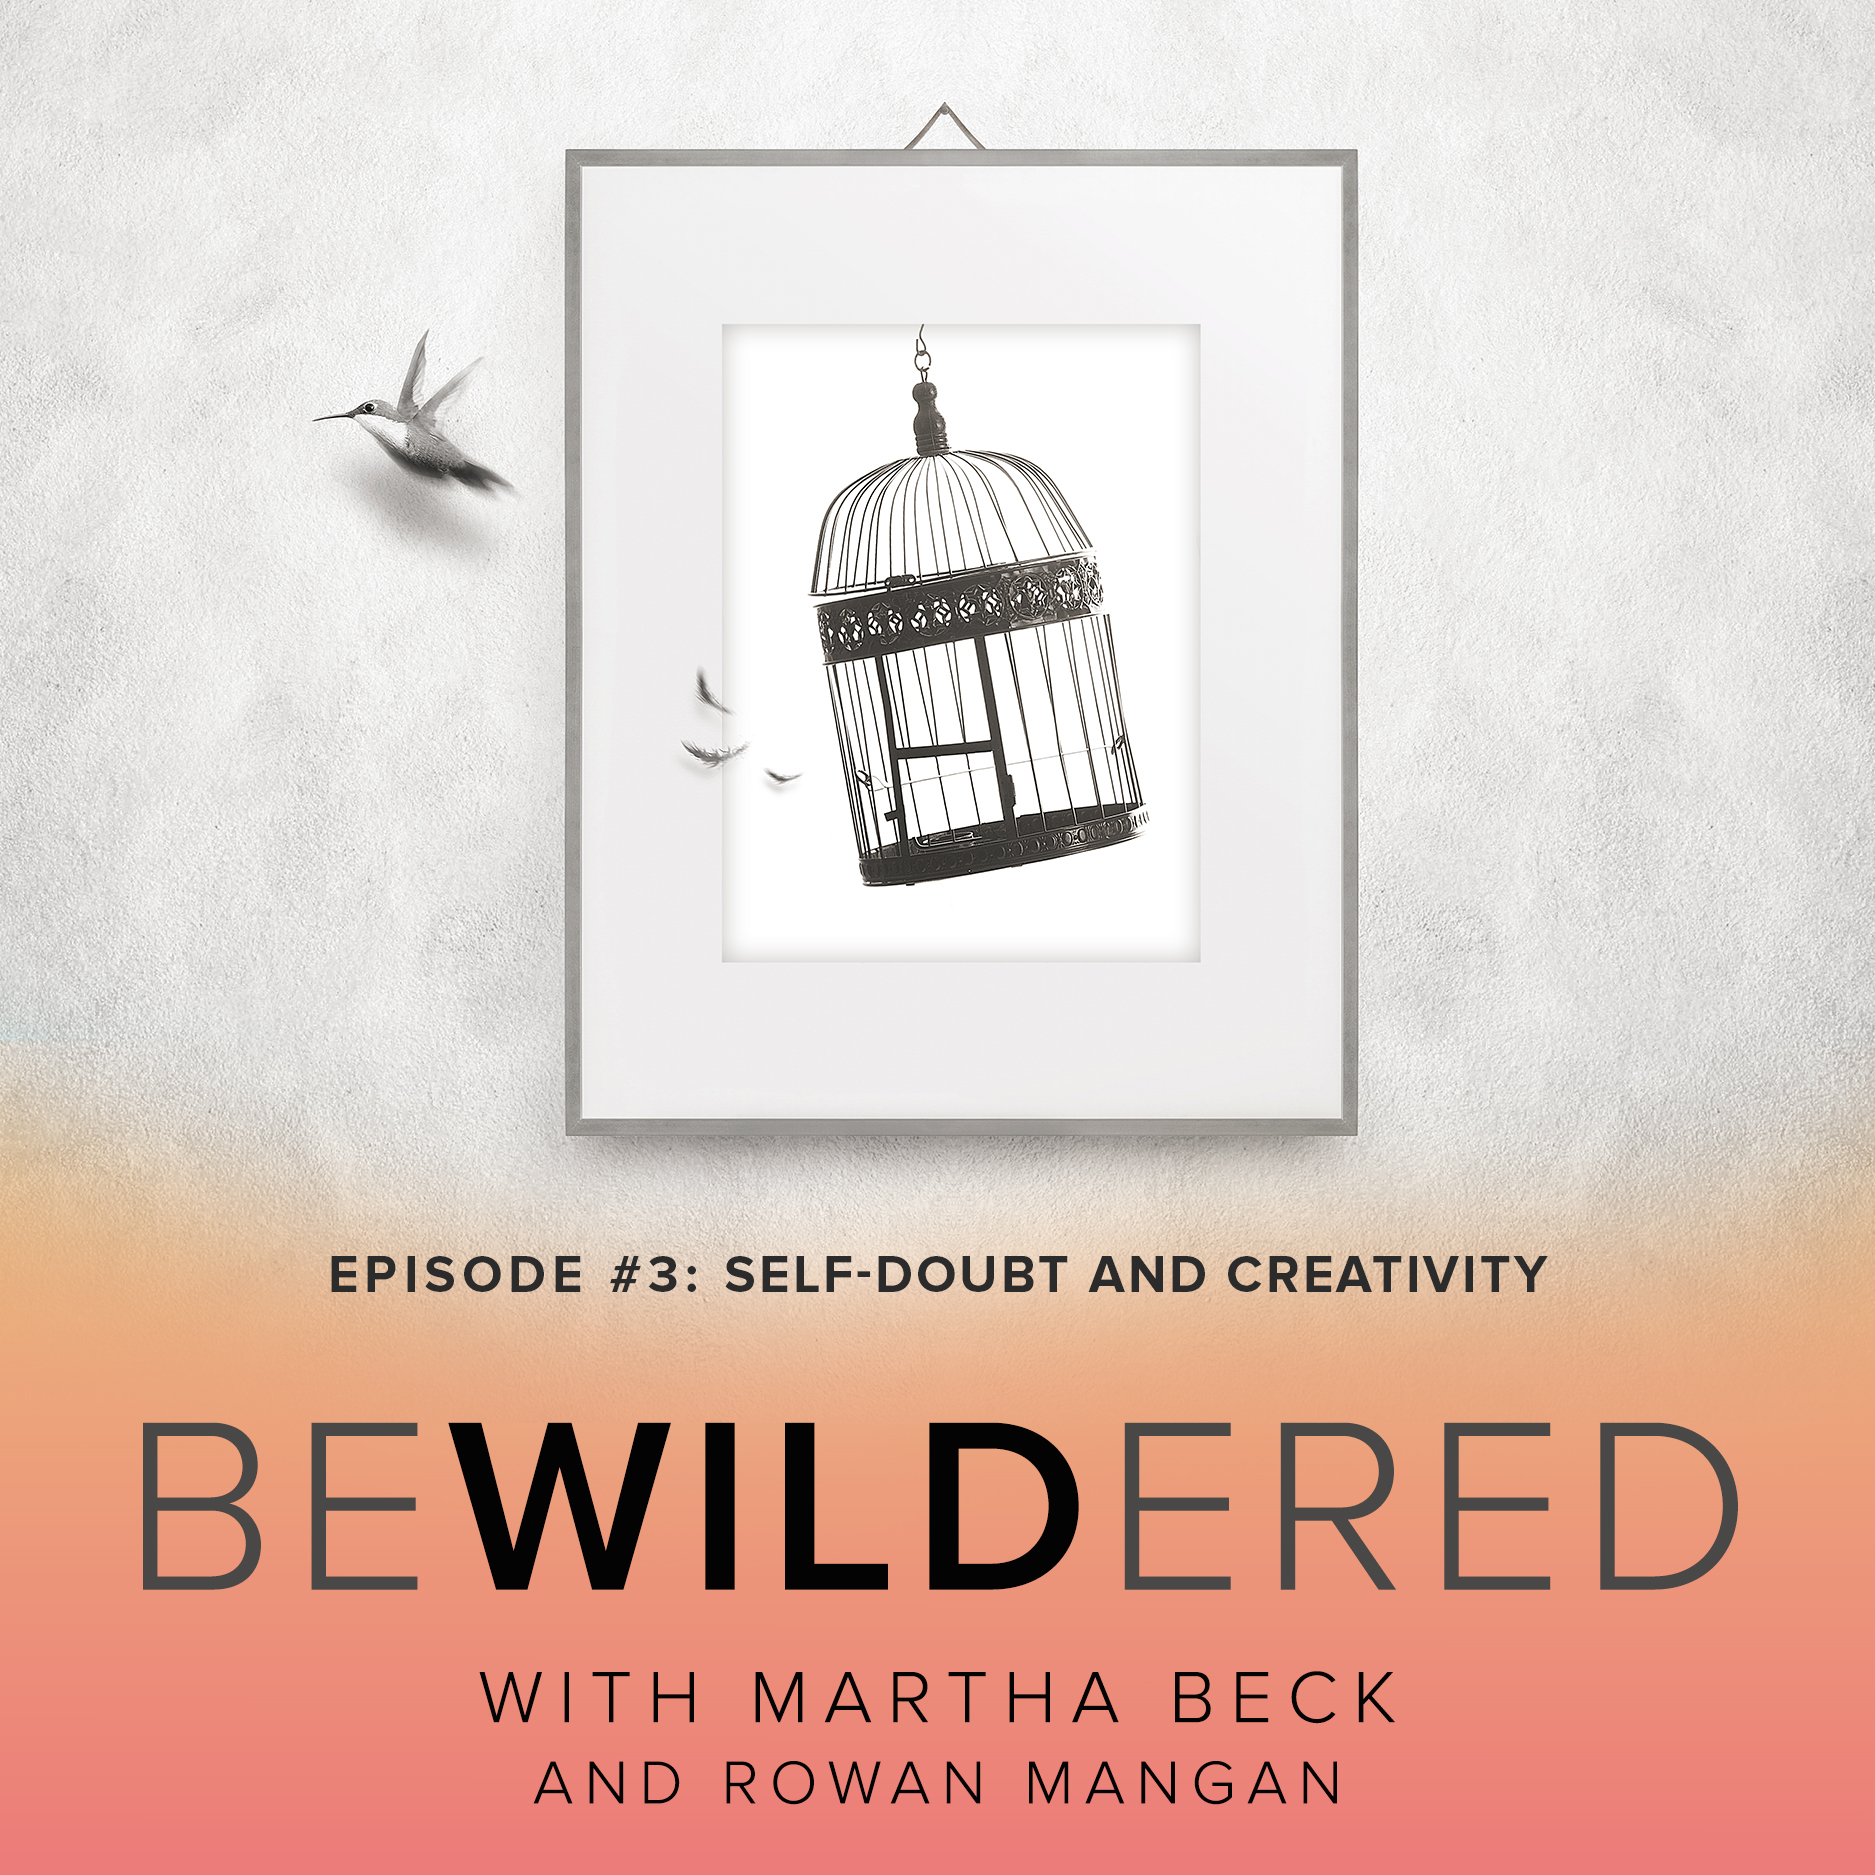 Image for Episode #3 Self-Doubt and Creativity for the Bewildered Podcast with Martha Beck and Rowan Mangan